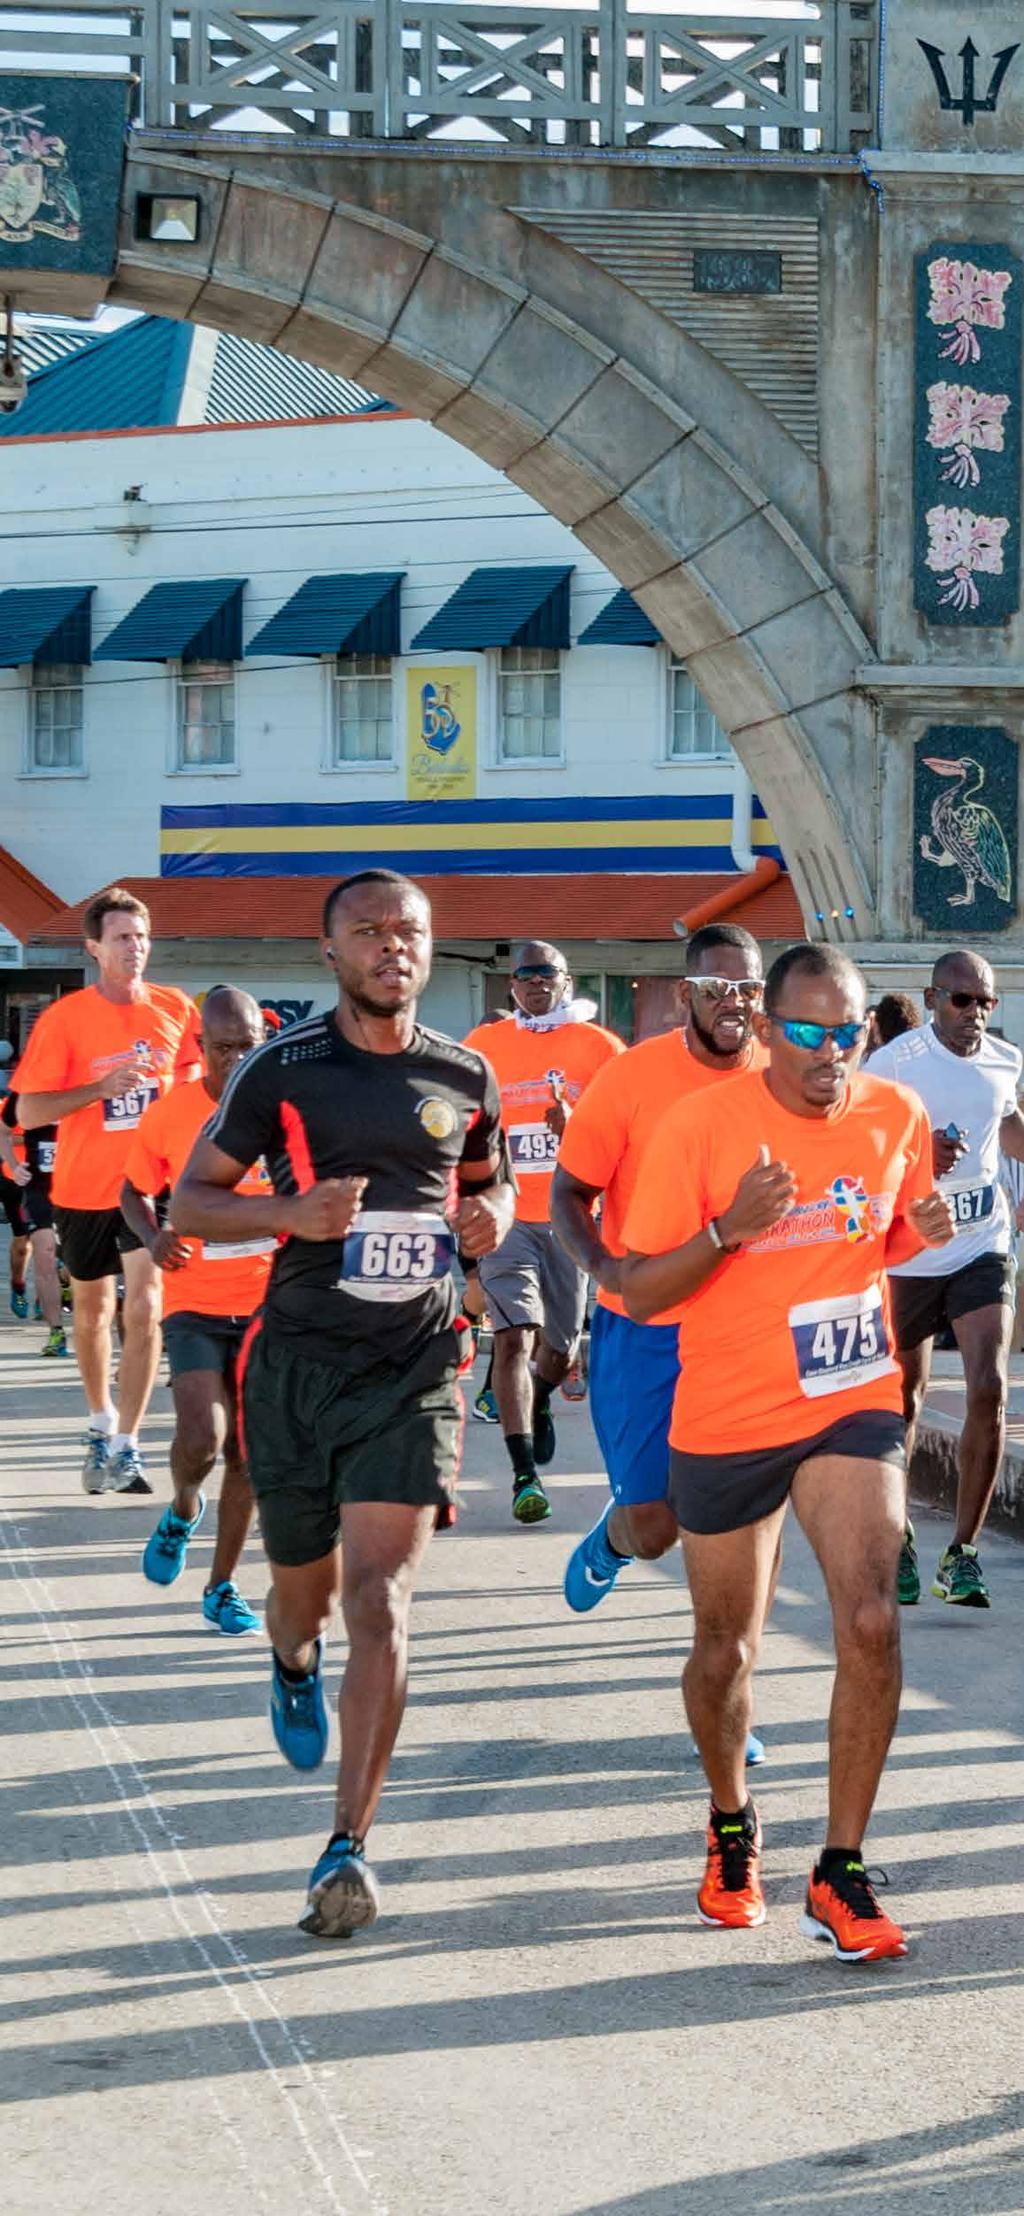 9 Run Barbados After Party at the Harbour Lights Night Club from 5pm. A great time to celebrate your Running achievements with friends, family and other runners.